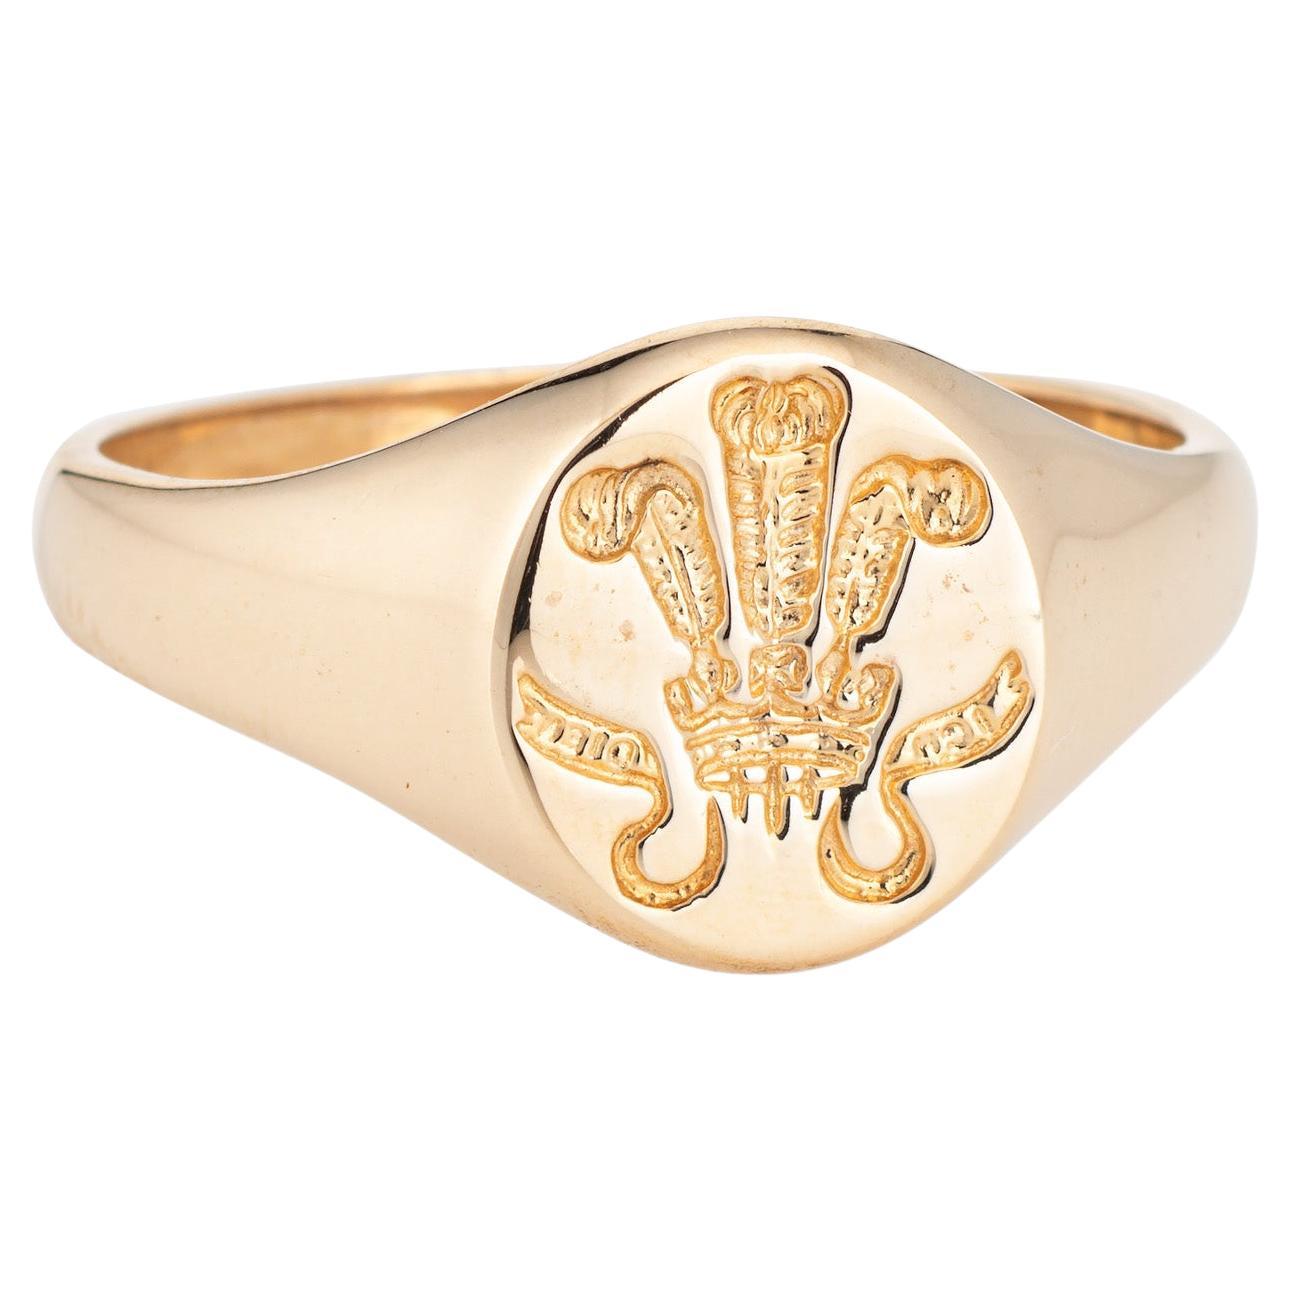 Prince of Wales Feathers Signet Ring Vinatge 9k Yellow Gold Men's Sz 12.5 